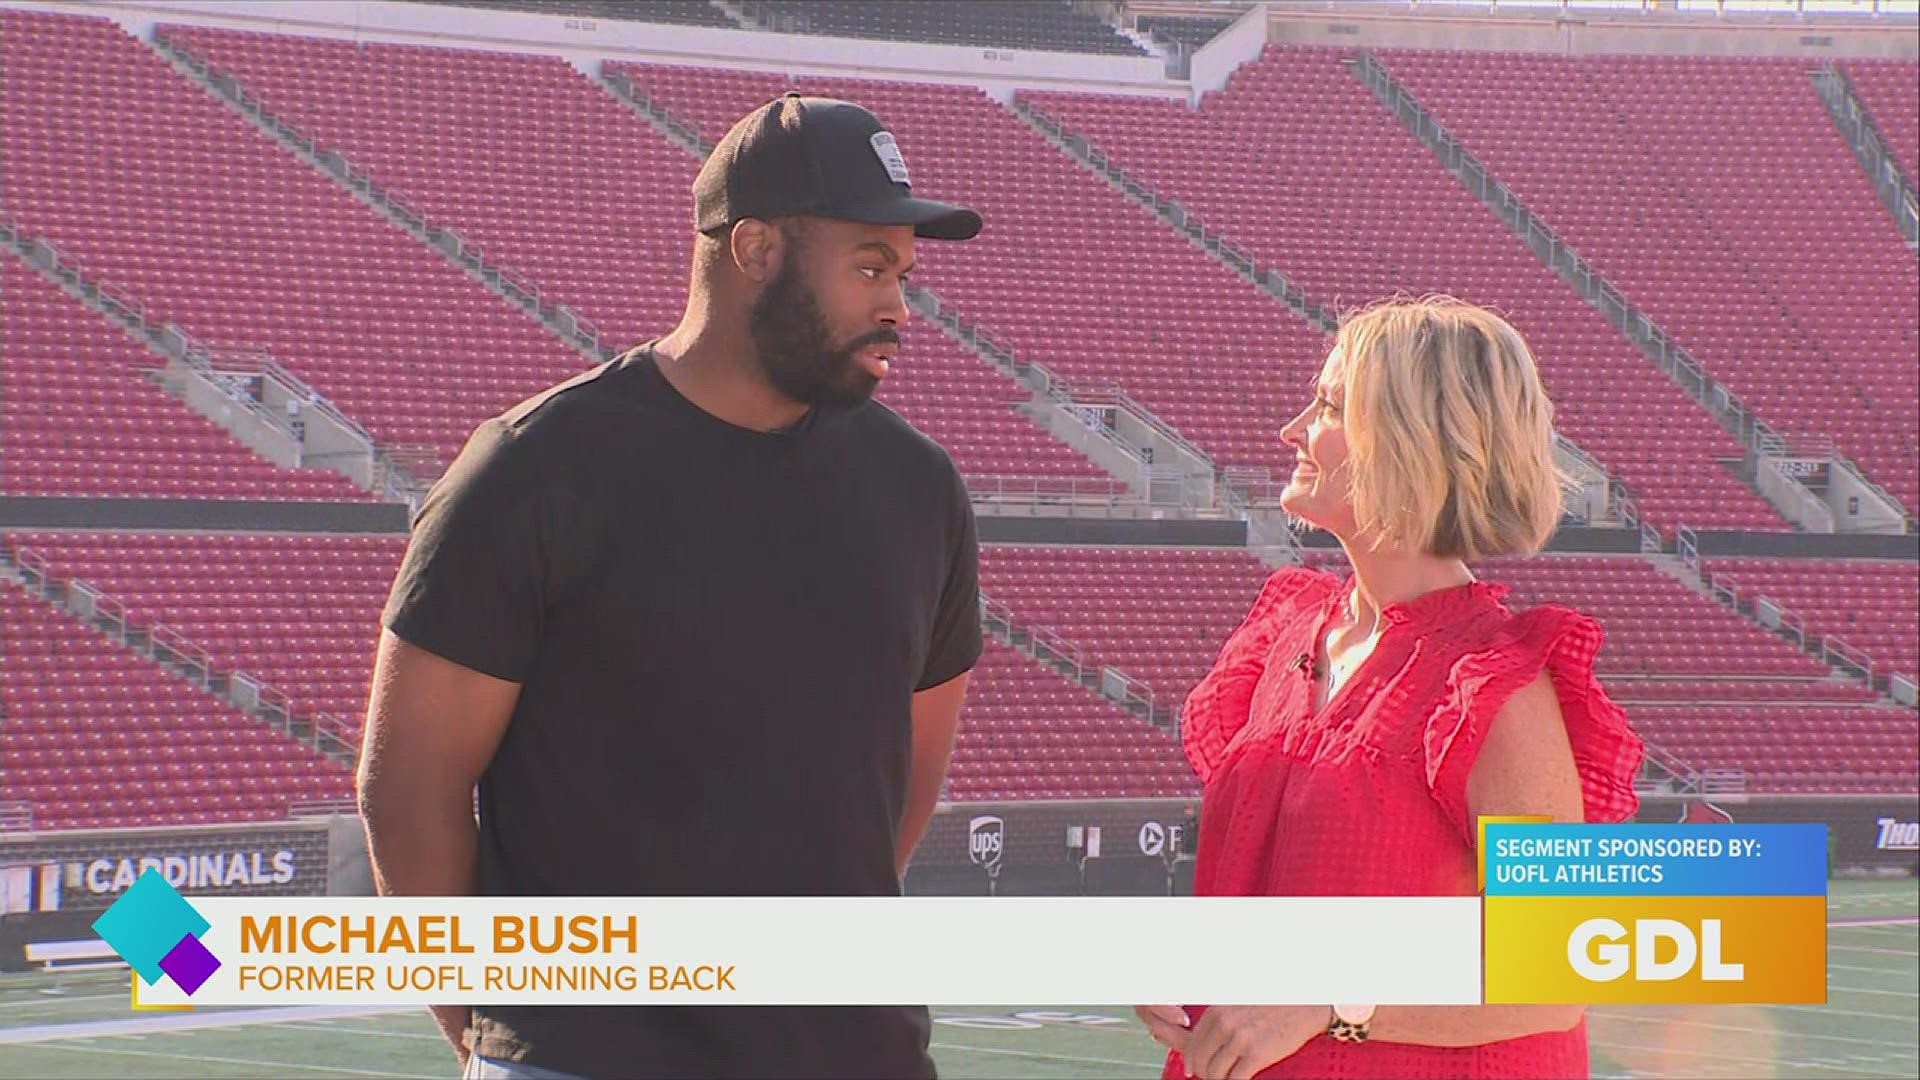 University of Louisville - Michael Bush honored at UofL Football team's  Home opener game